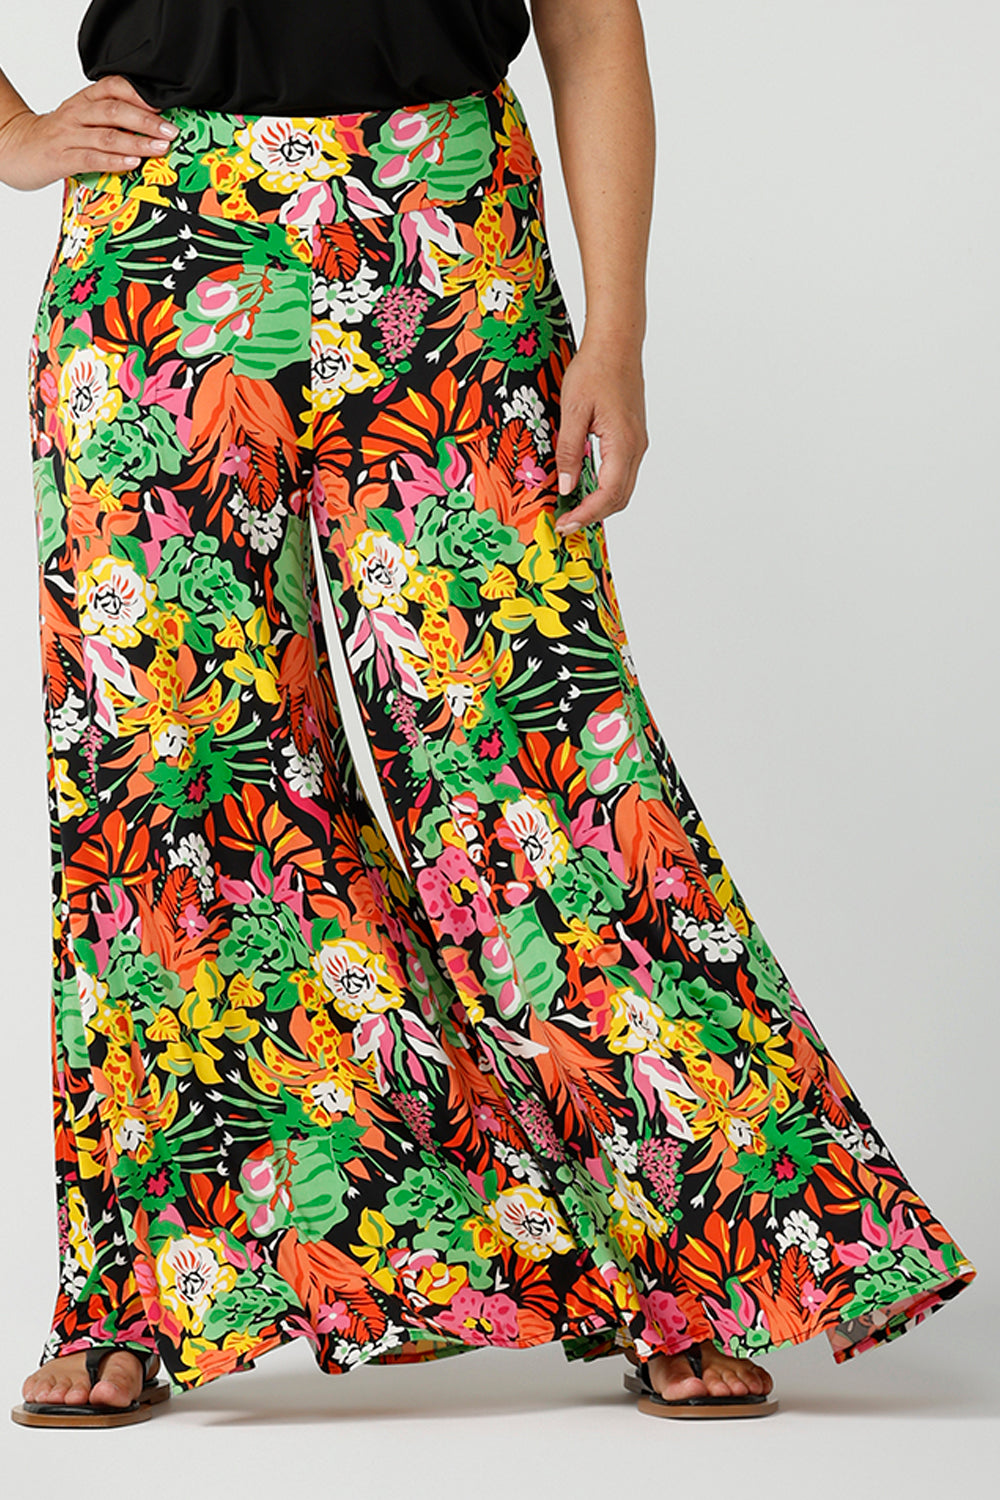 Close up of a size 12 woman wearing the Caspian Palazzo pant n a beautiful bright colourful print. In soft and lightweight jersey this pant features side pocket and a wide leg opening. Styled back with a black cami top and flat sandals. A perfect look for